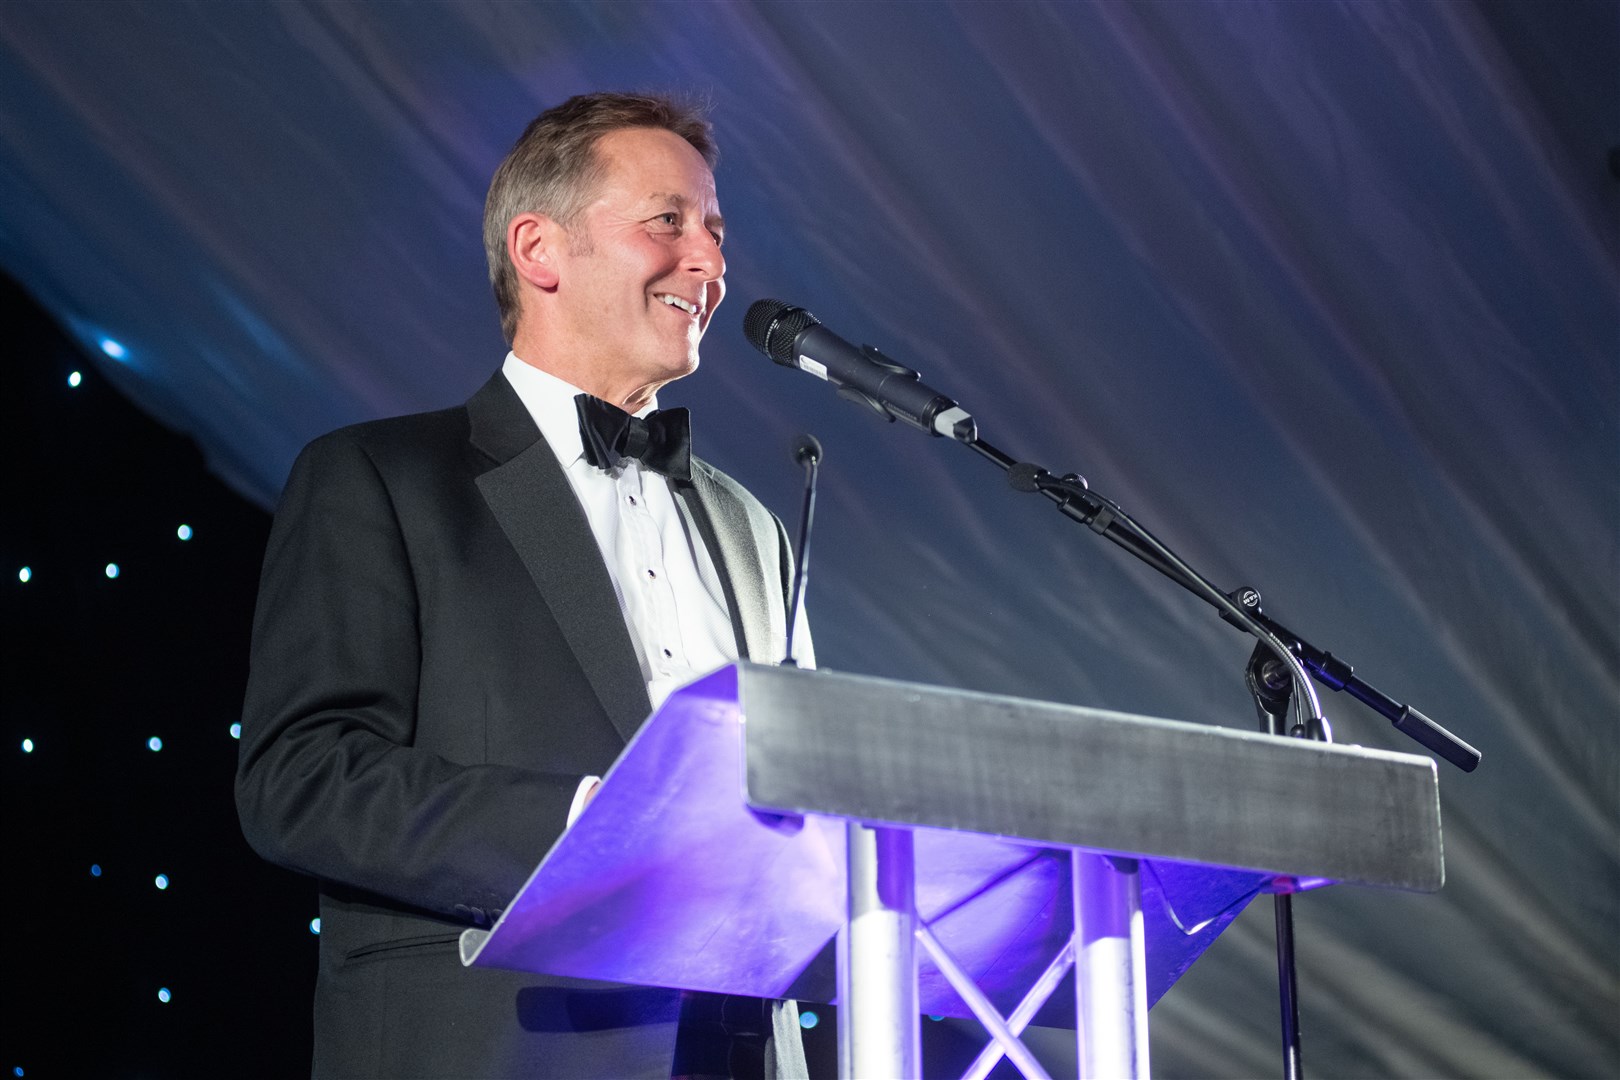 Henry Angus of Associated Seafoods...17th Annual Moray Chamber of Commerce Awards Dinner, held at Gordon Castle on Friday 30th September 2022...Picture: Daniel Forsyth..